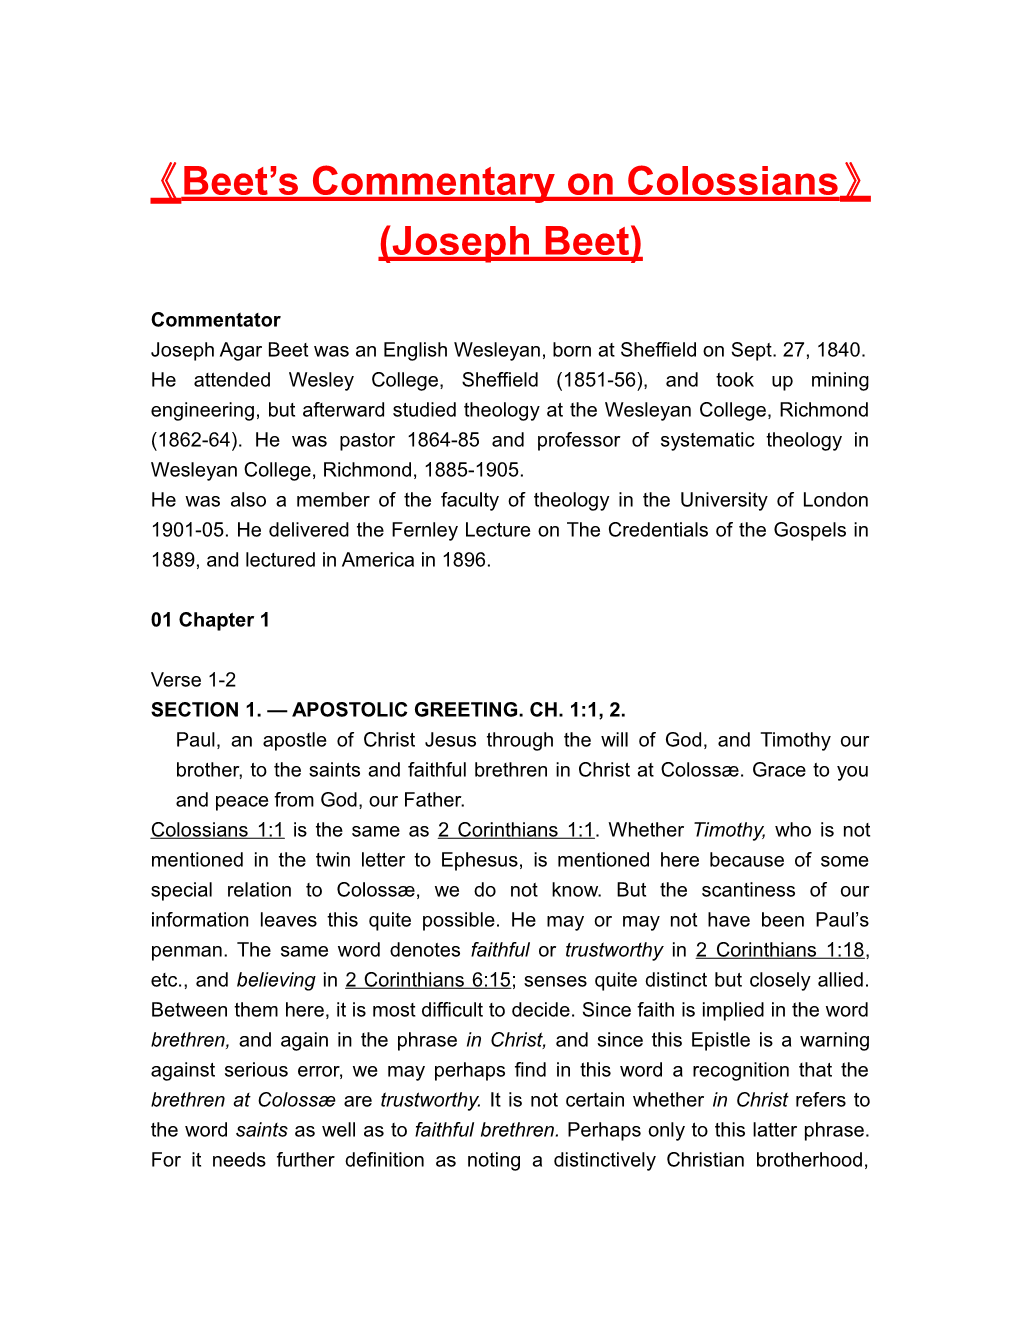 Beet S Commentary on Colossians (Joseph Beet)